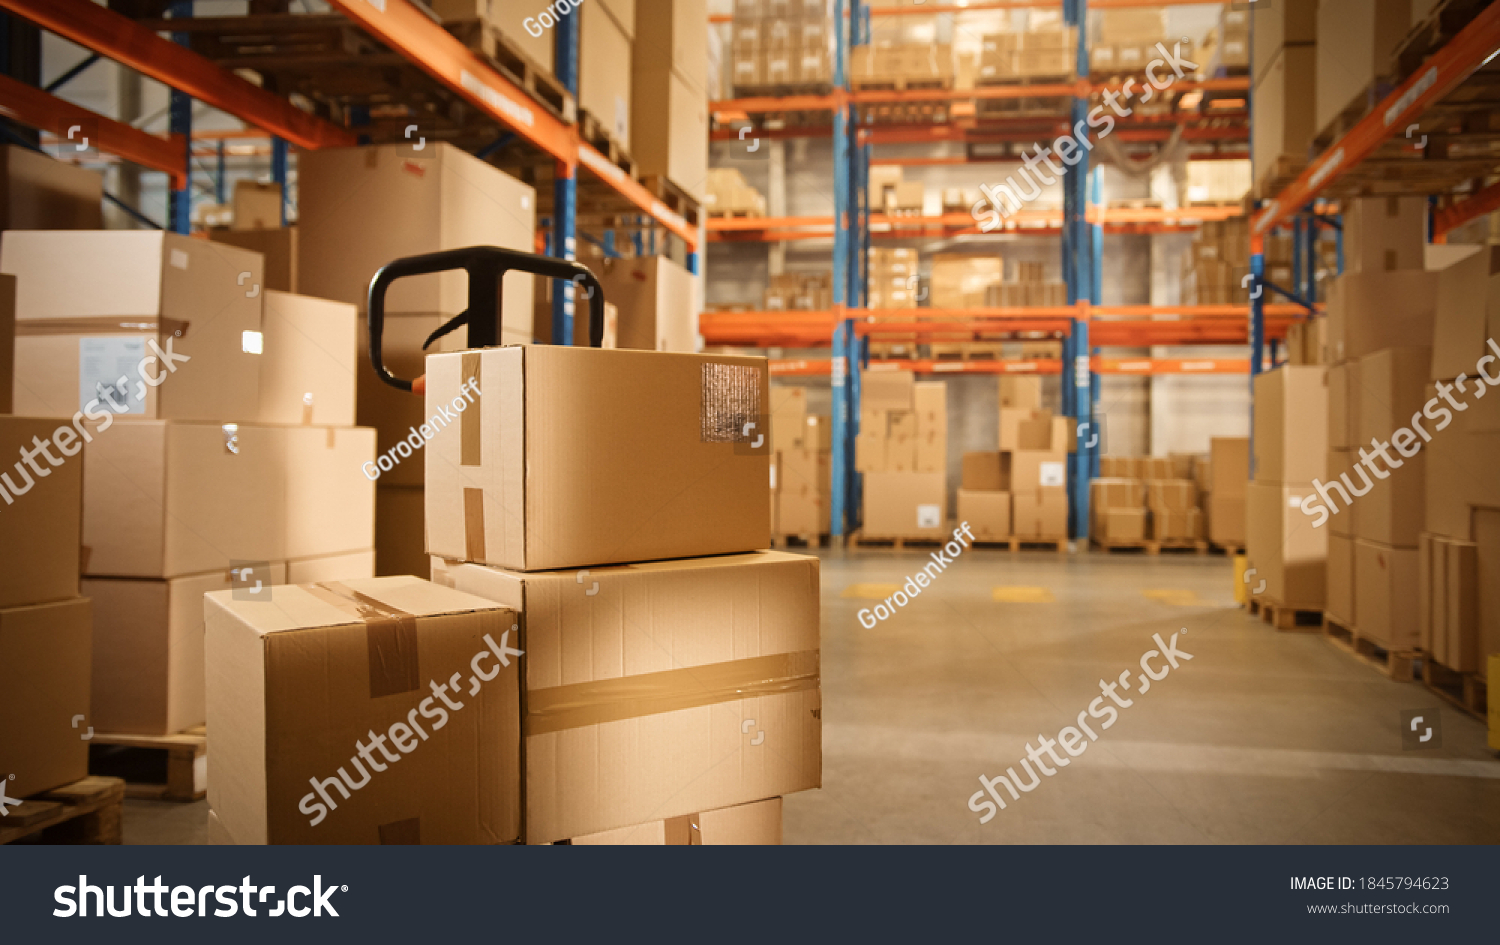 Big Retail Warehouse full of Shelves with Goods Stored on Manual Pallet Truck in Cardboard Boxes and Packages. Forklift Driving in Background. Logistics and Distribution Facility for Product Delivery #1845794623